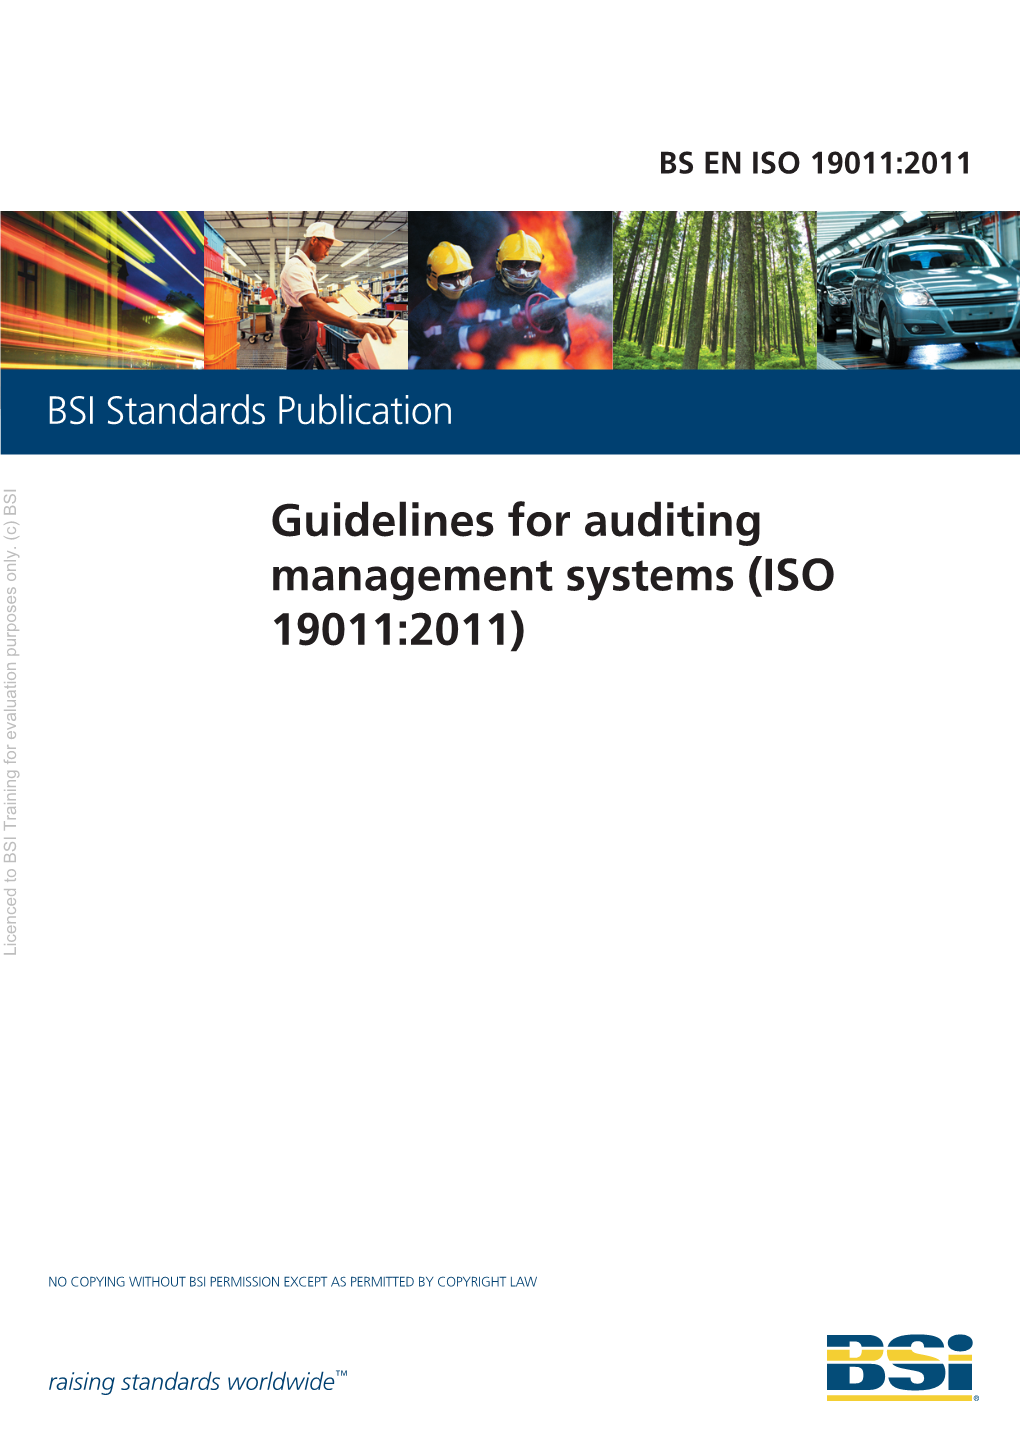 Guidelines for Auditing Management Systems (ISO 19011:2011) Licenced to BSI Training for Evaluation Purposes Only